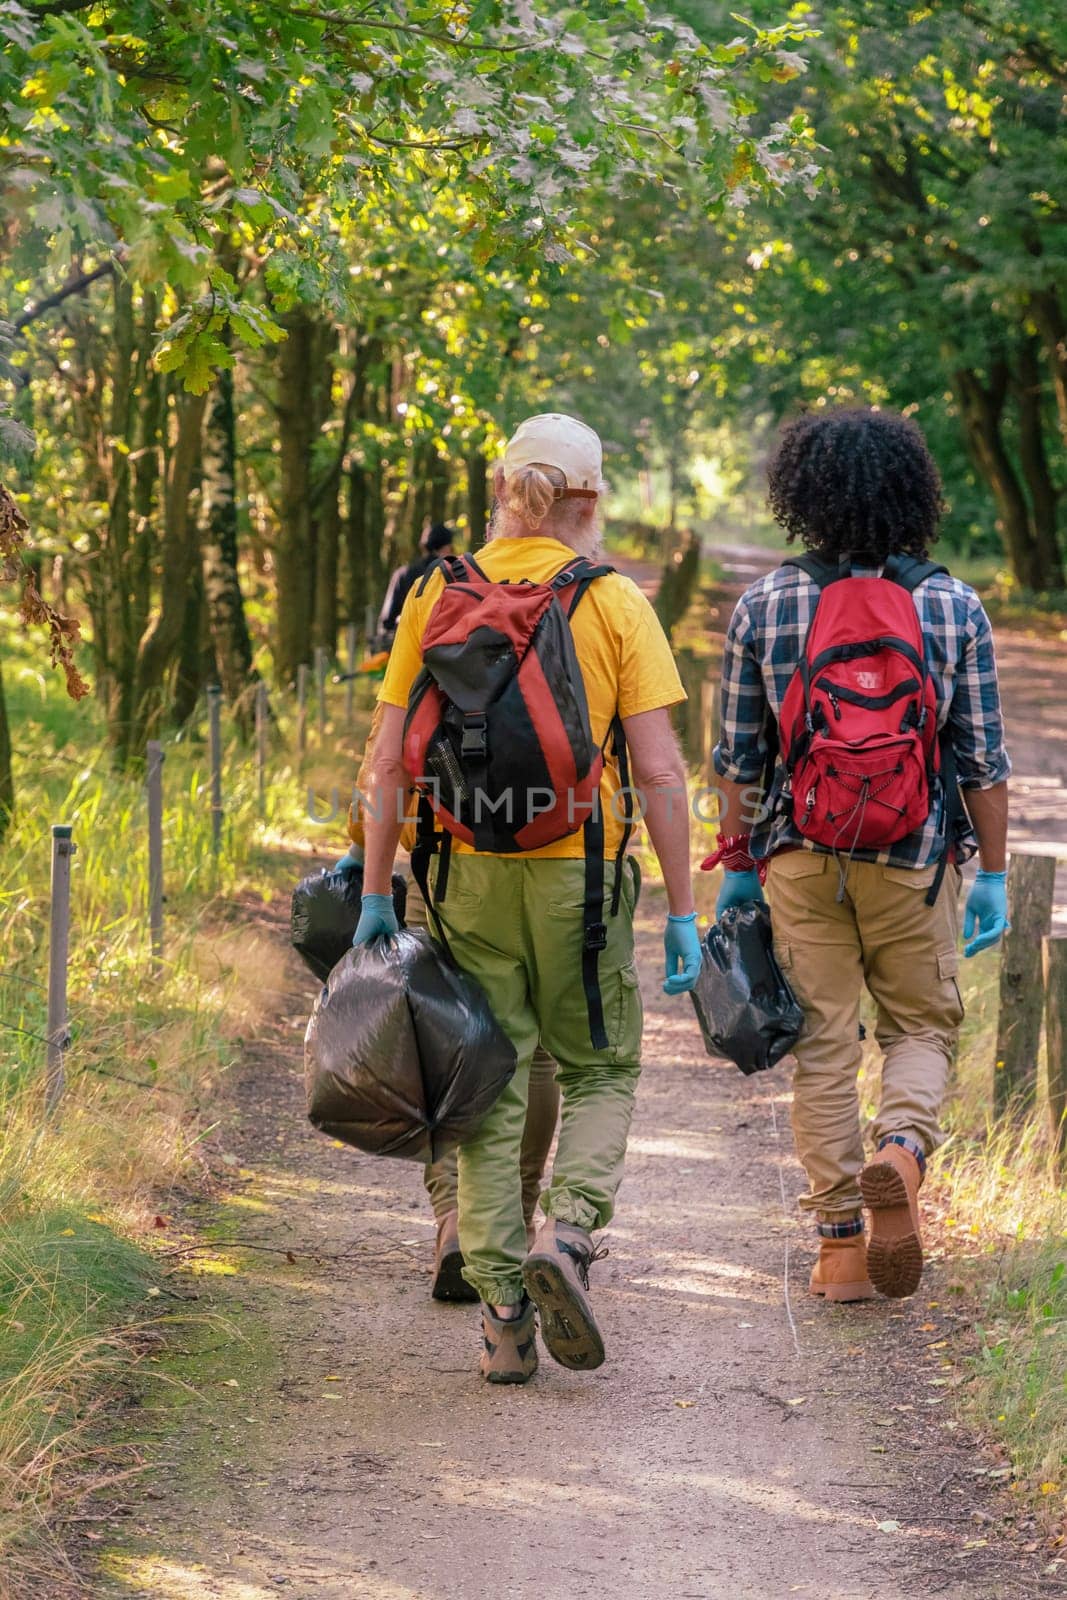 Volunteers of a multinational group go into the forest with bags for collecting and recycling garbage, we see the backs with rucksacks of people leaving for the forest, High quality photo